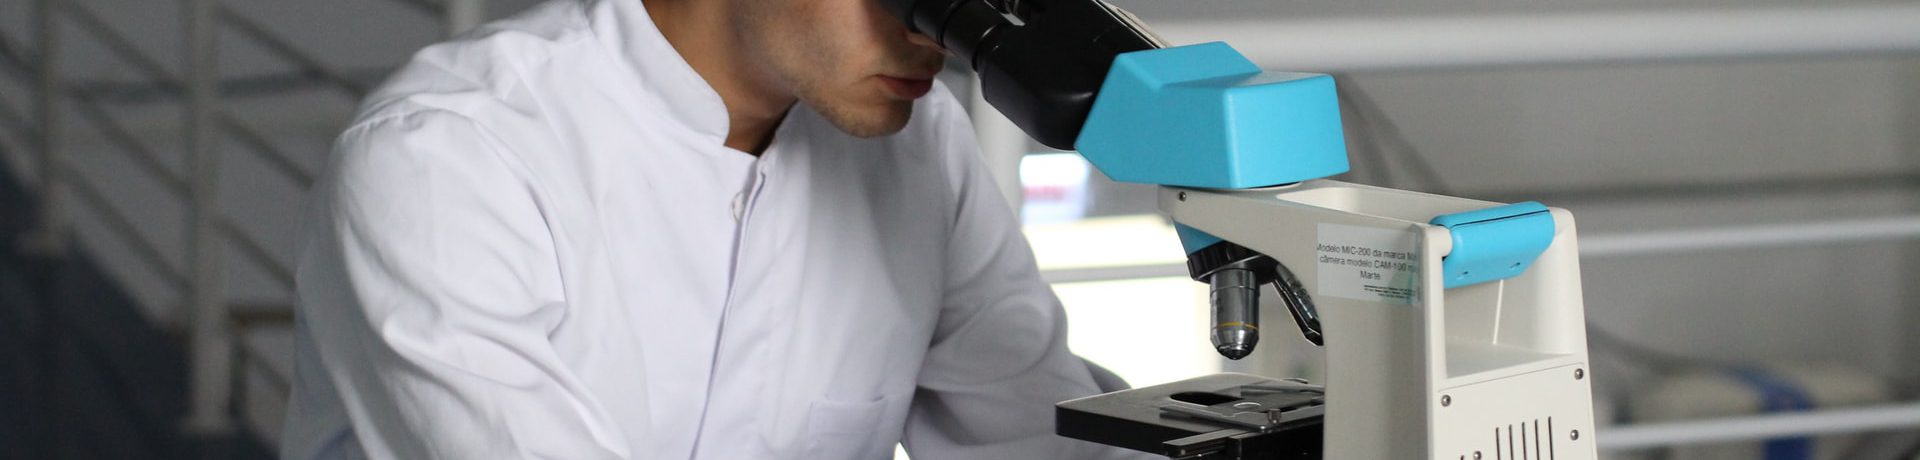 A man working in a lab using a microscope representing students doing medical research